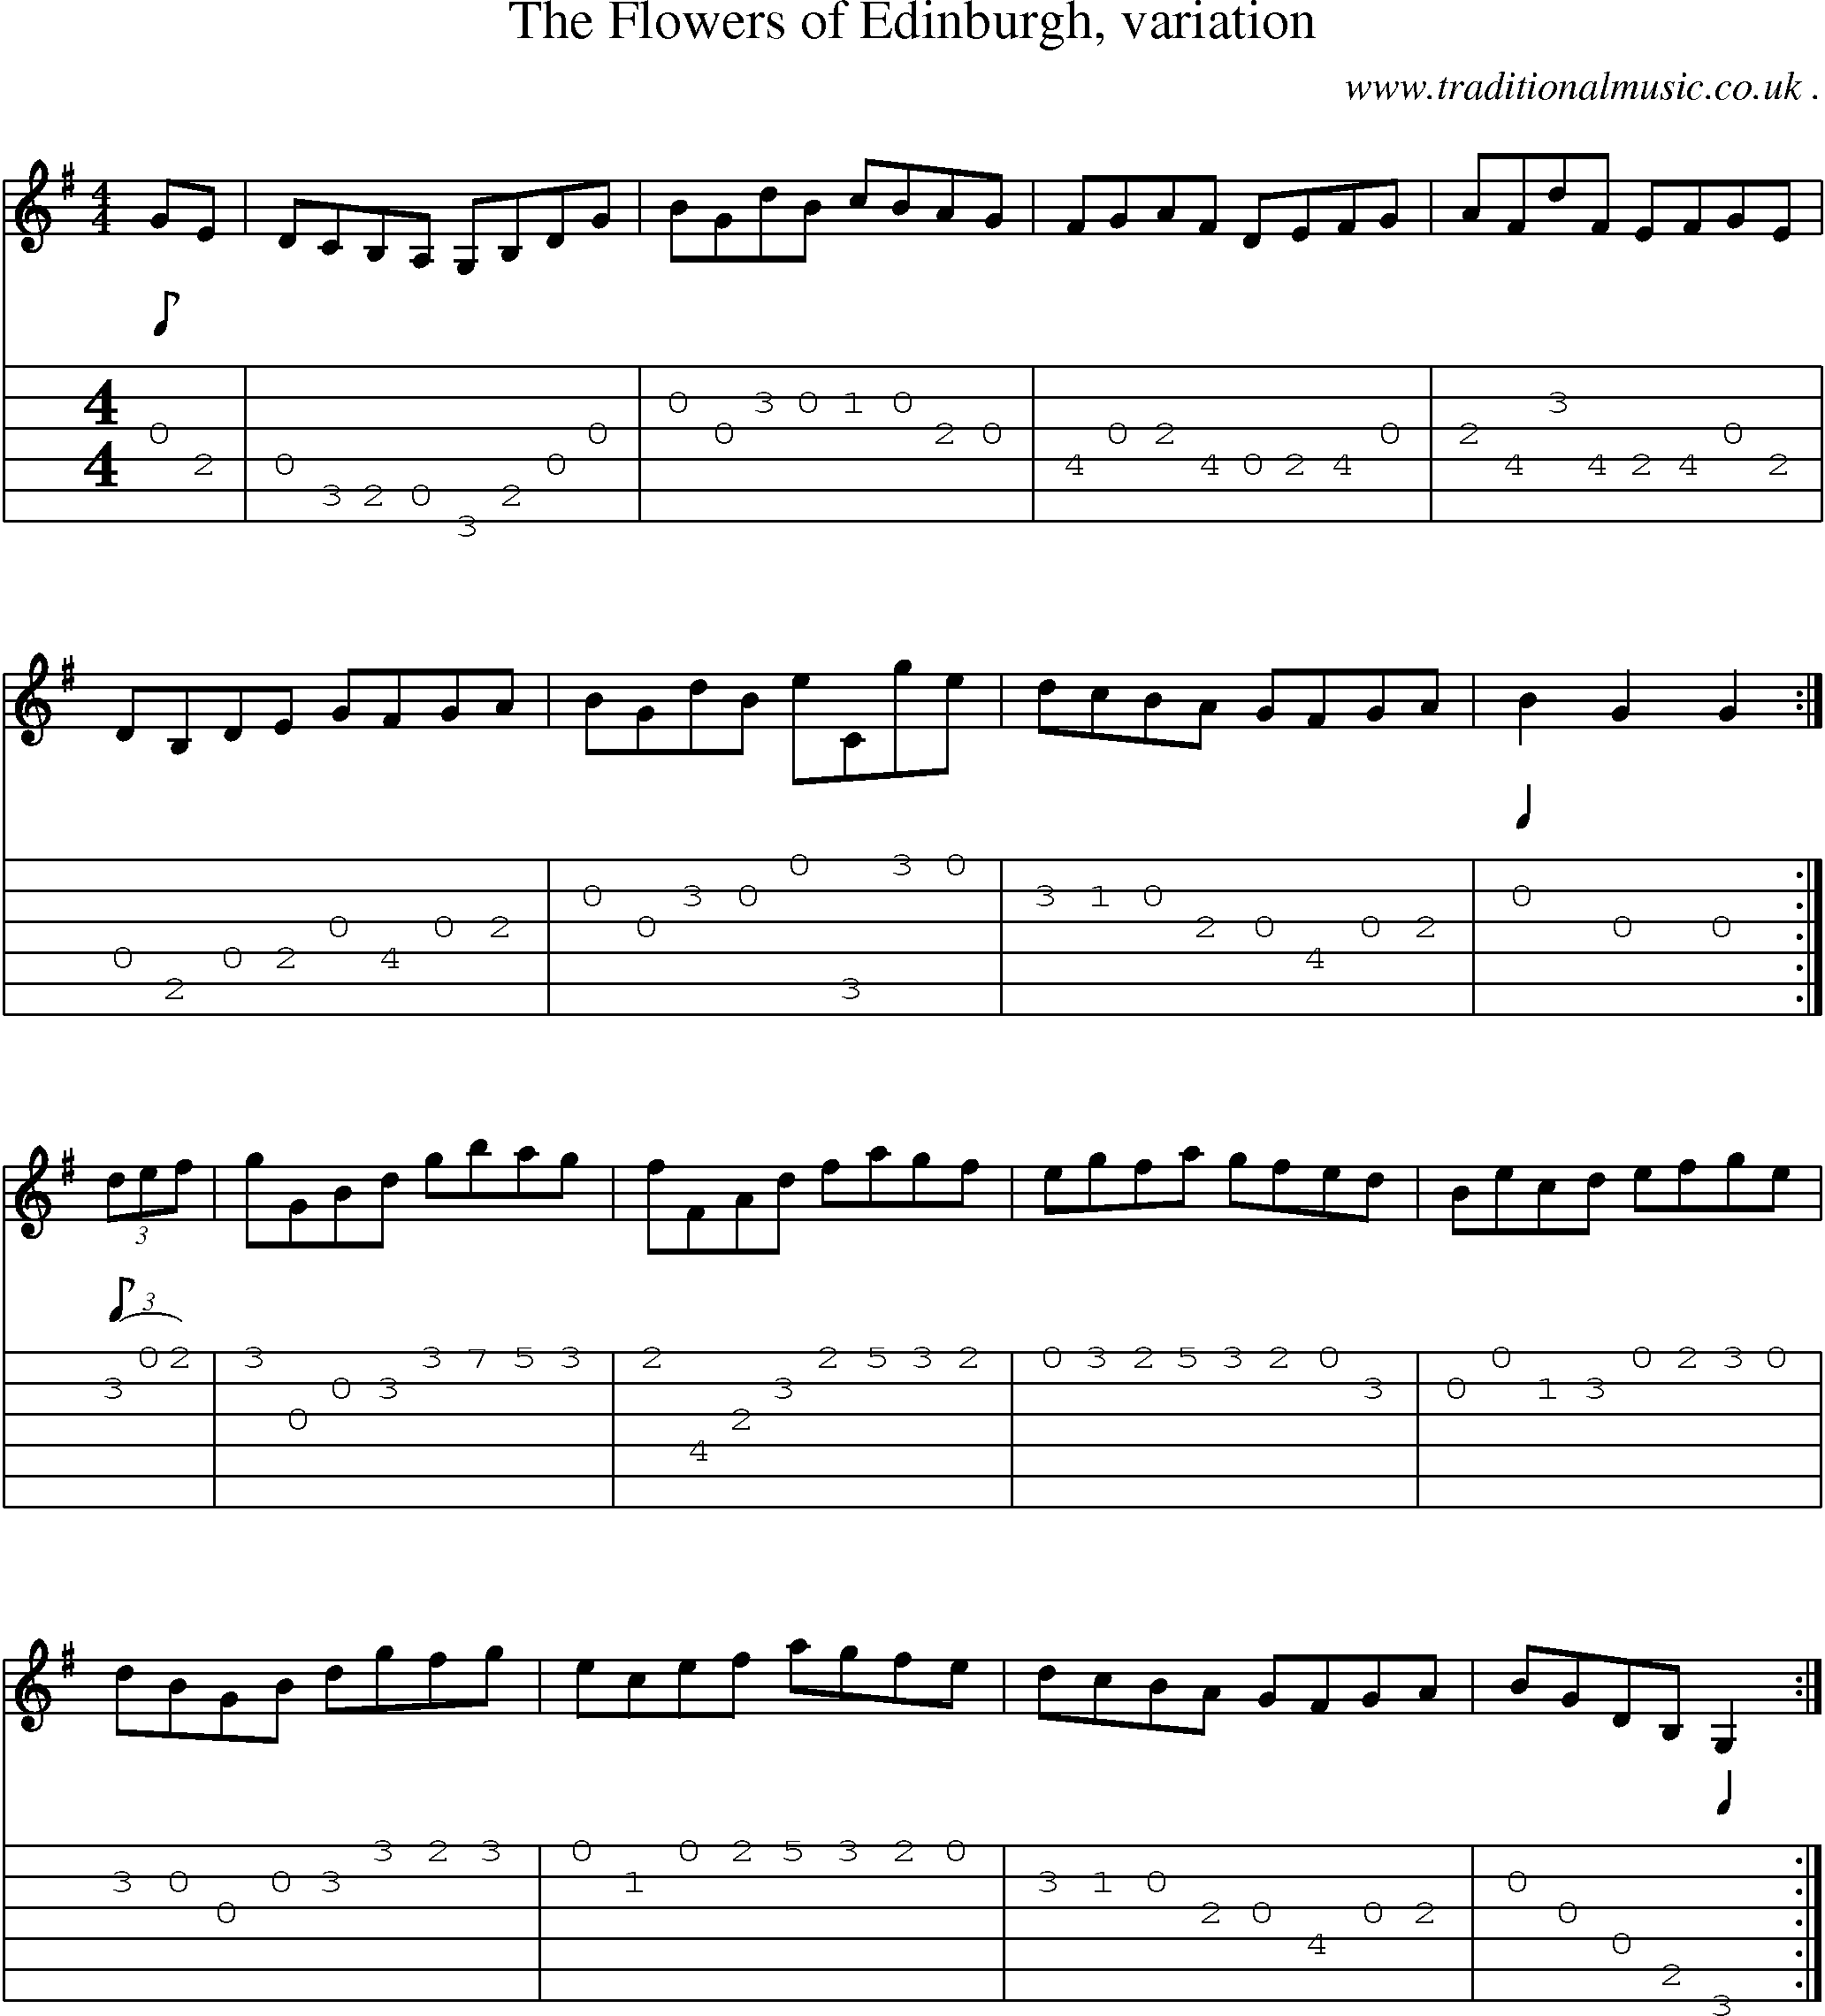 Sheet-music  score, Chords and Guitar Tabs for The Flowers Of Edinburgh Variation